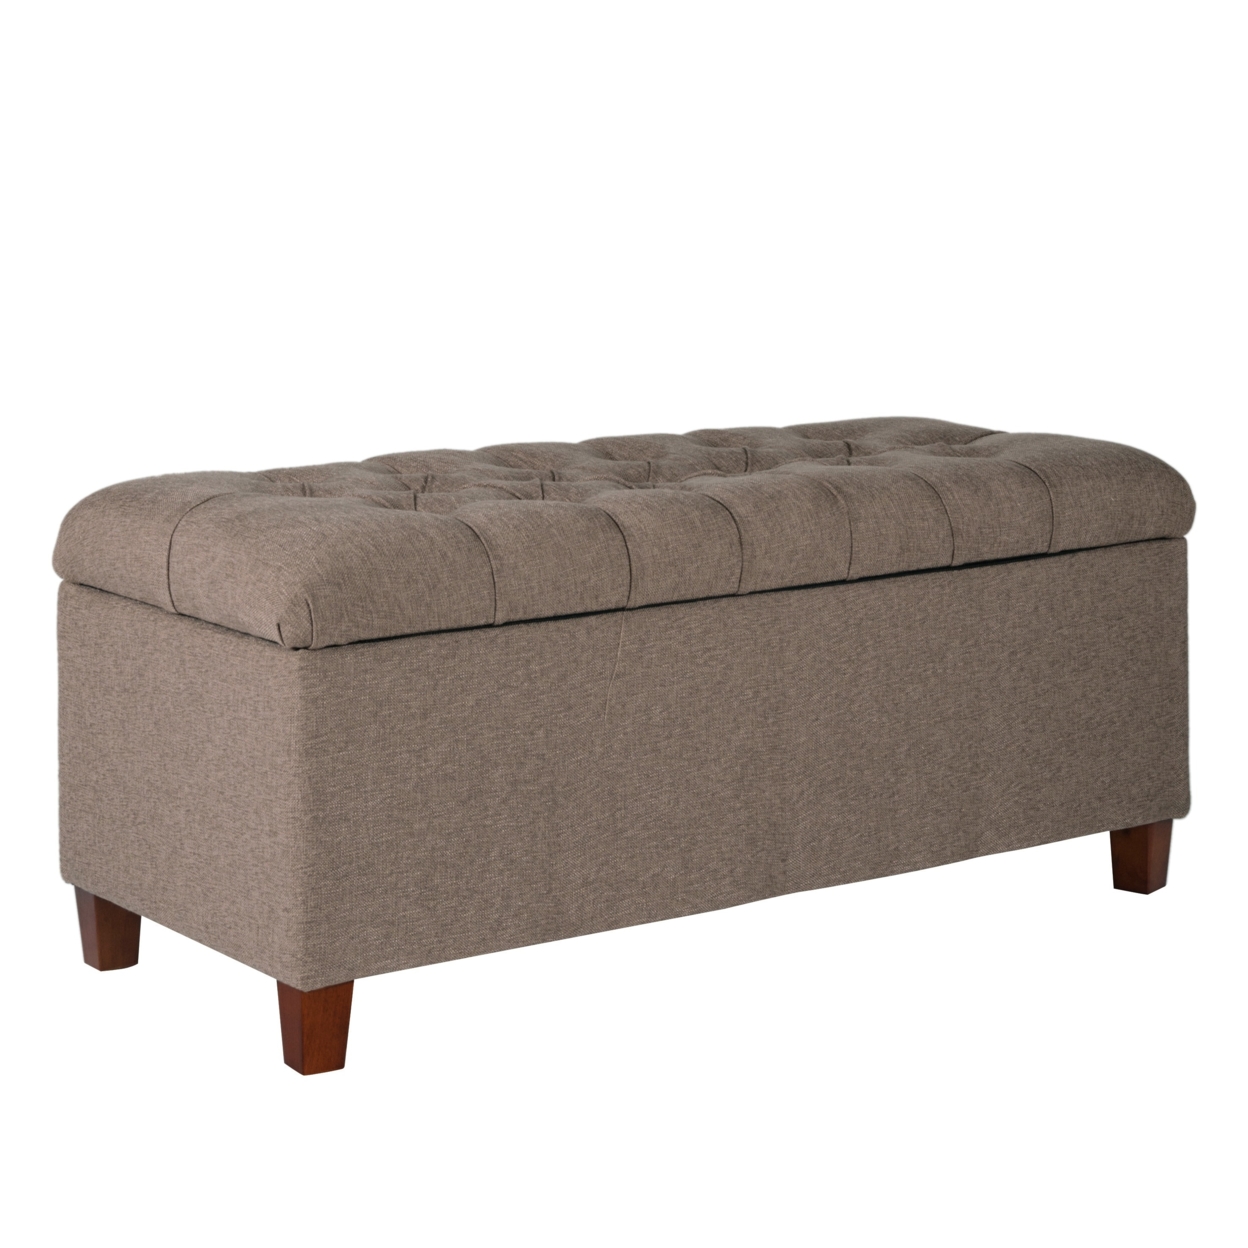 Saltoro Sherpi Textured Fabric Upholstered Tufted Wooden Bench With Hinged Storage, Brown